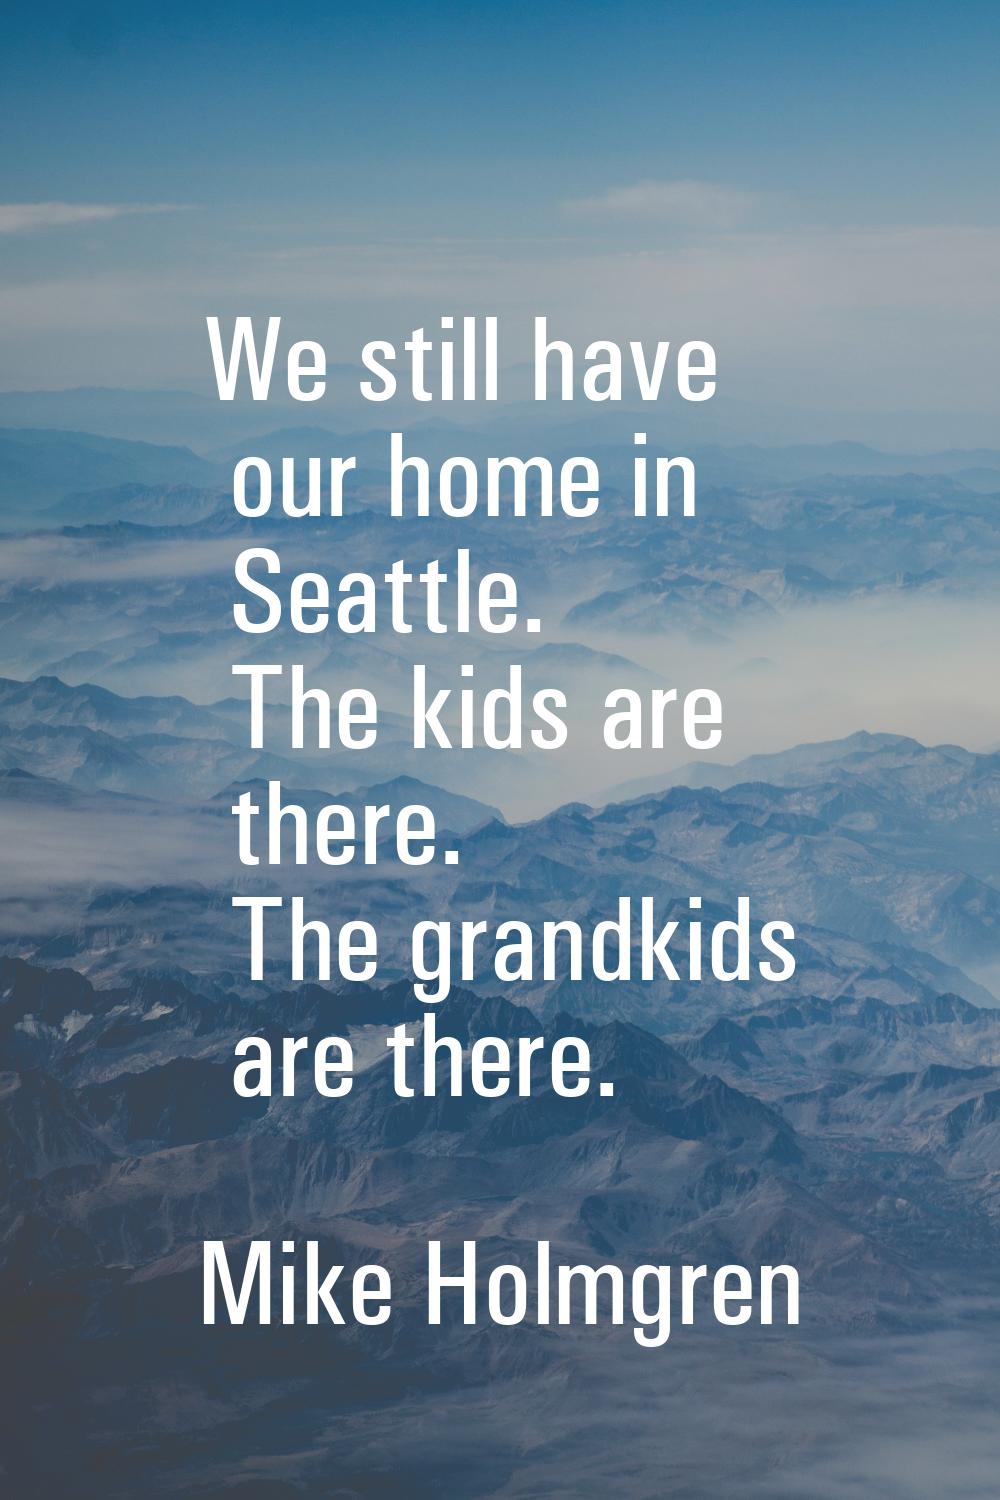 We still have our home in Seattle. The kids are there. The grandkids are there.